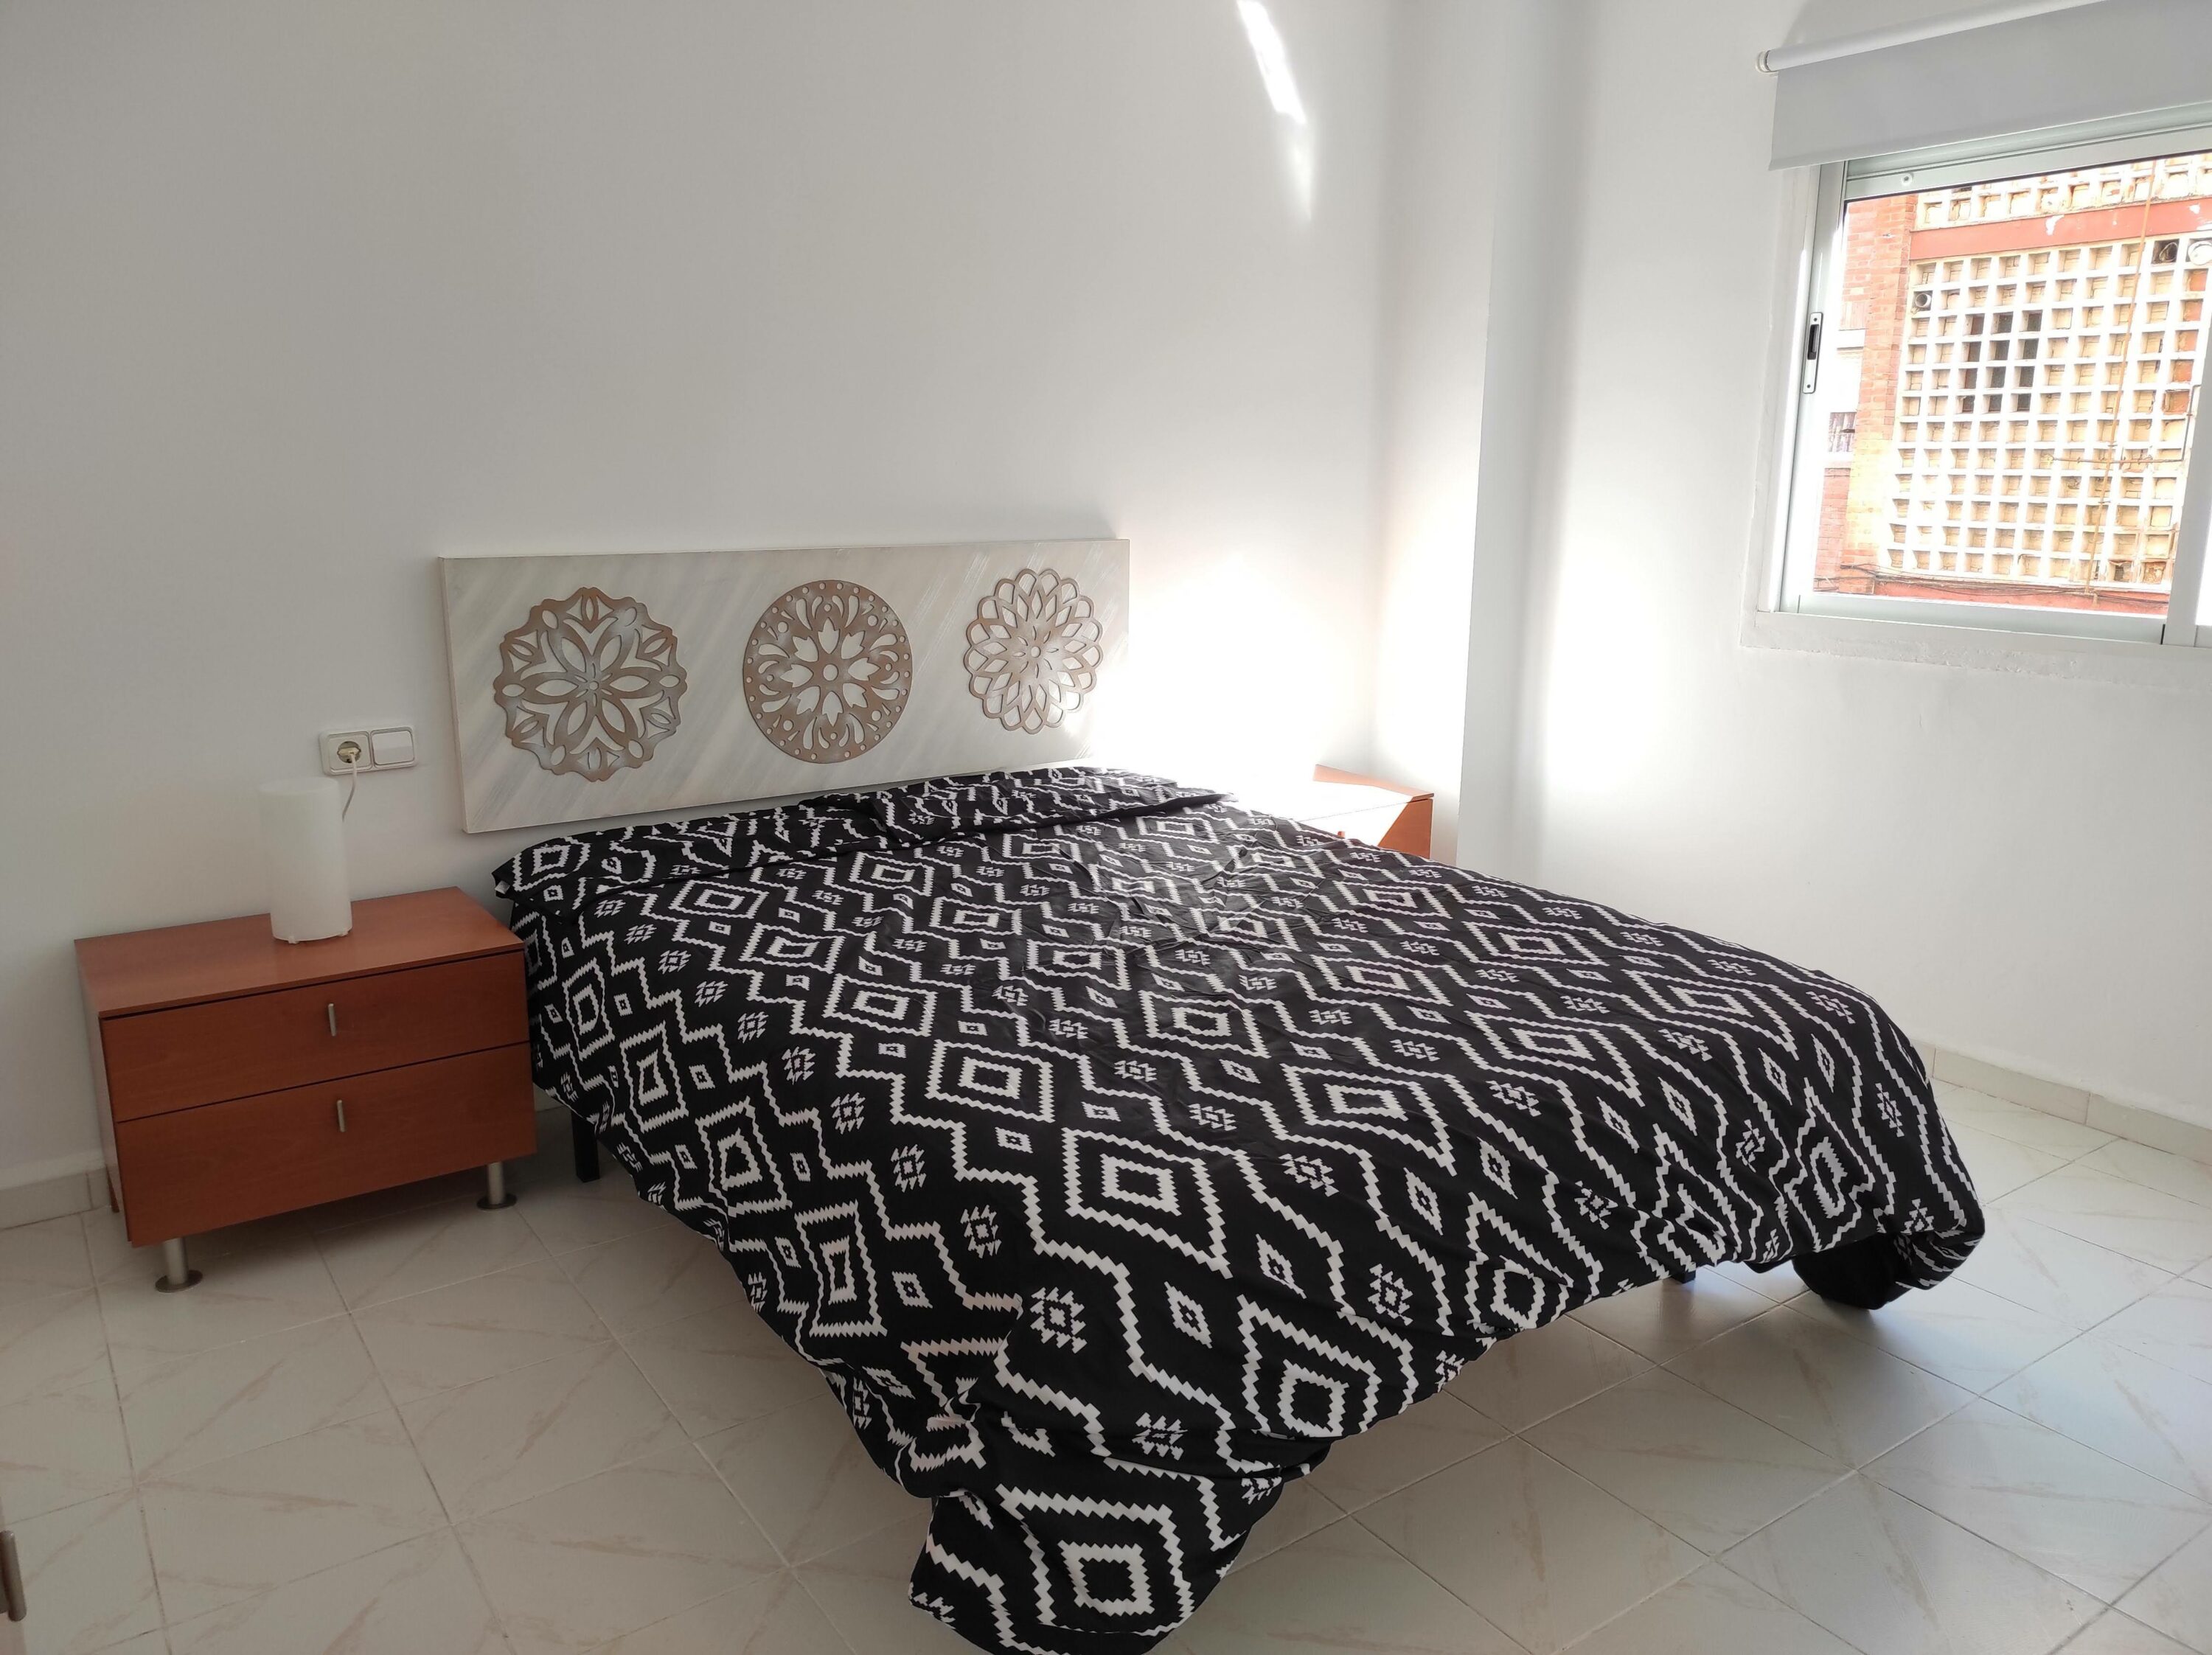 Student Flat for rent in Moncada – Ref. 1416